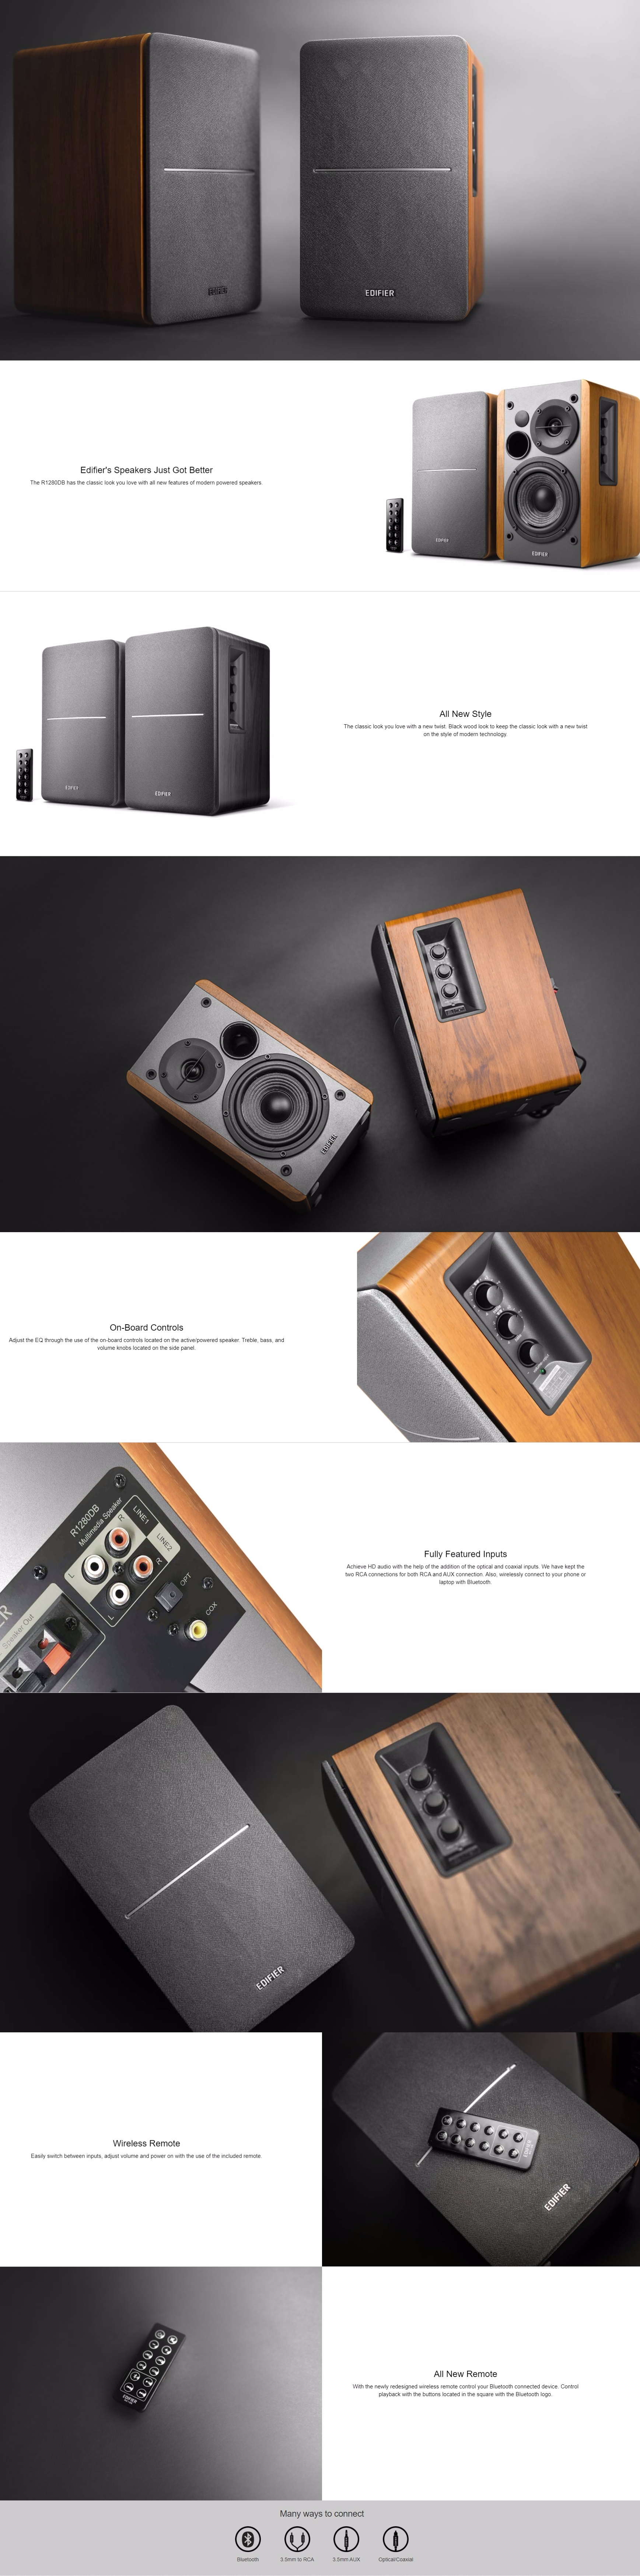 A large marketing image providing additional information about the product Edifier R1280DB 2.0 Lifestyle Studio Speakers w/ Bluetooth & Optical - Additional alt info not provided